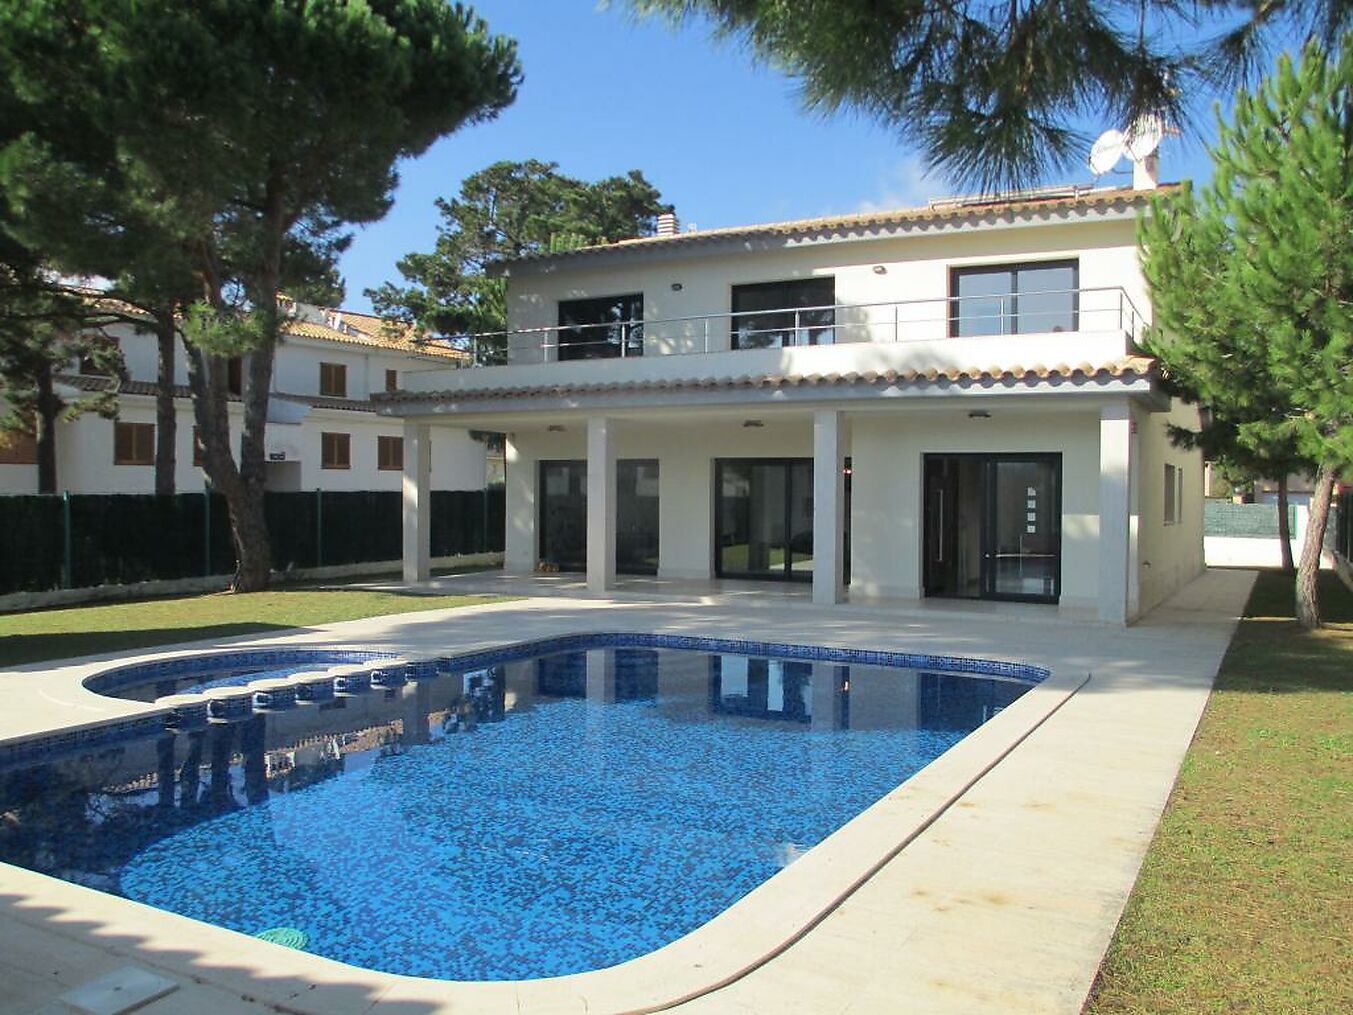 Modern Villa in the beautiful town of S 'Agaró.